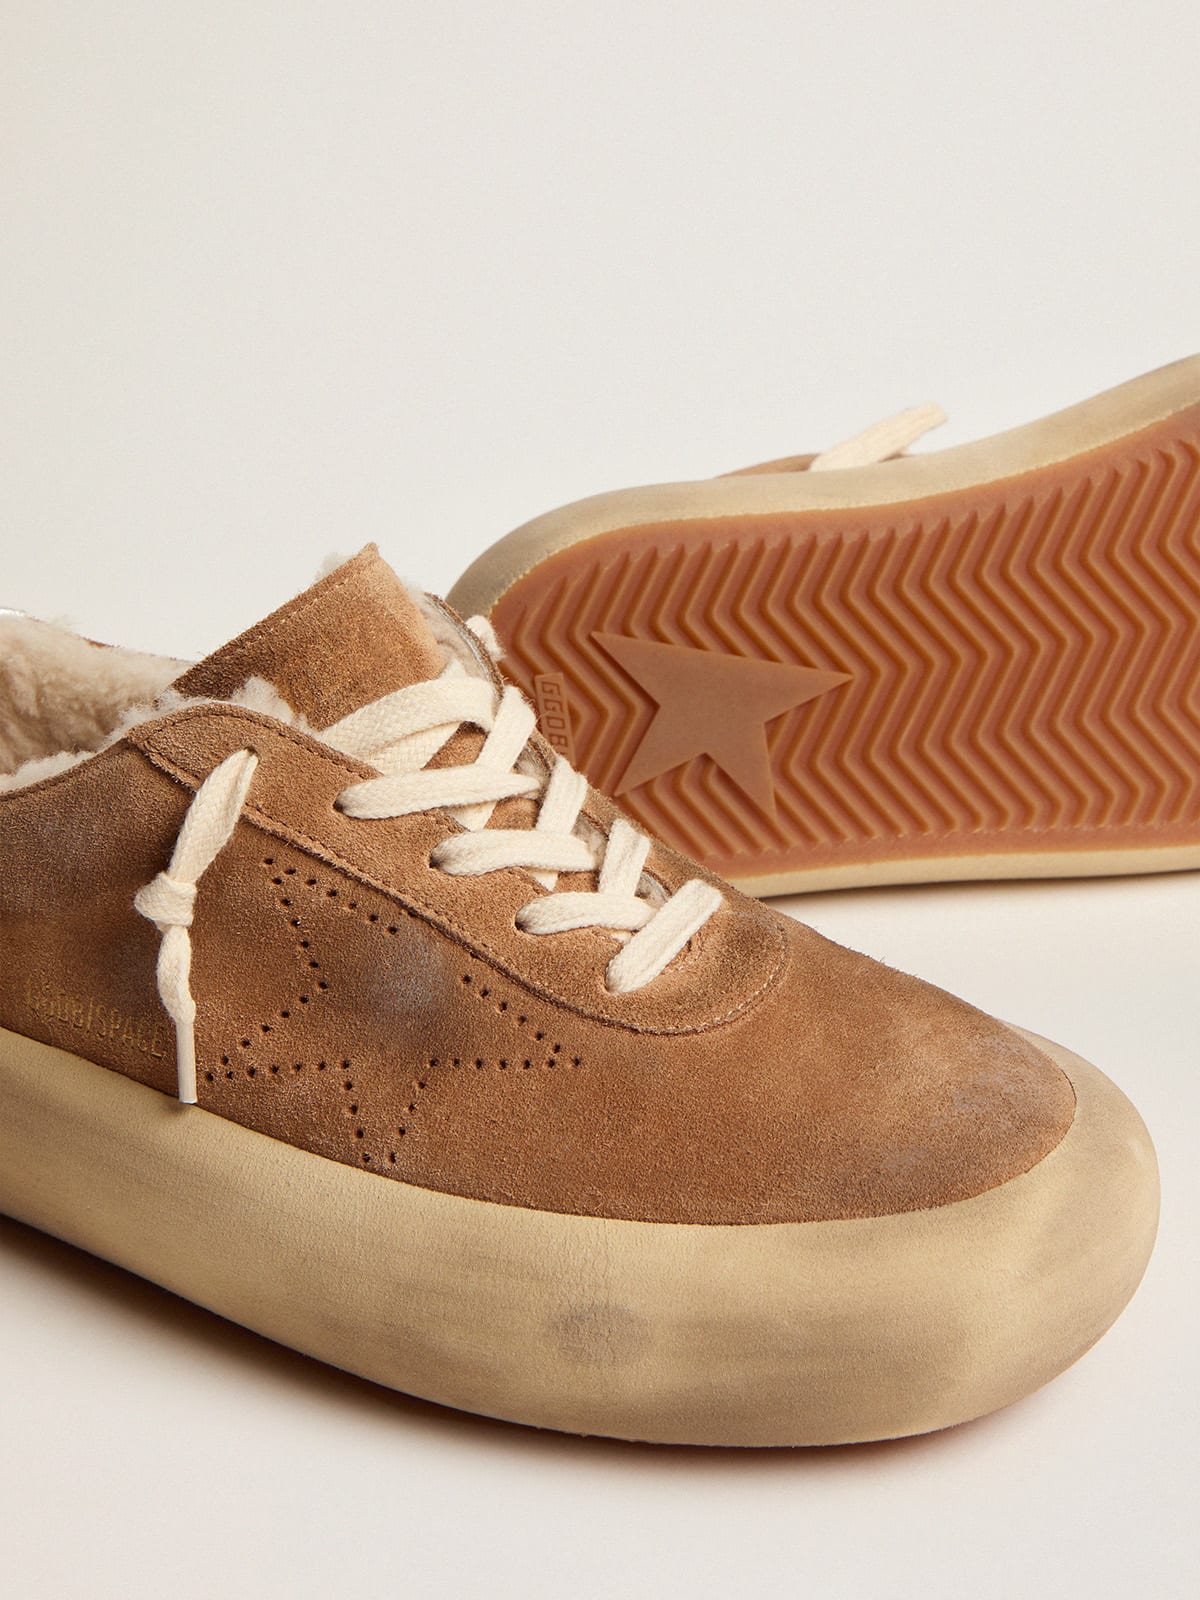 Golden Goose - Men's Space-Star in tobacco-colored suede and shearling lining in 